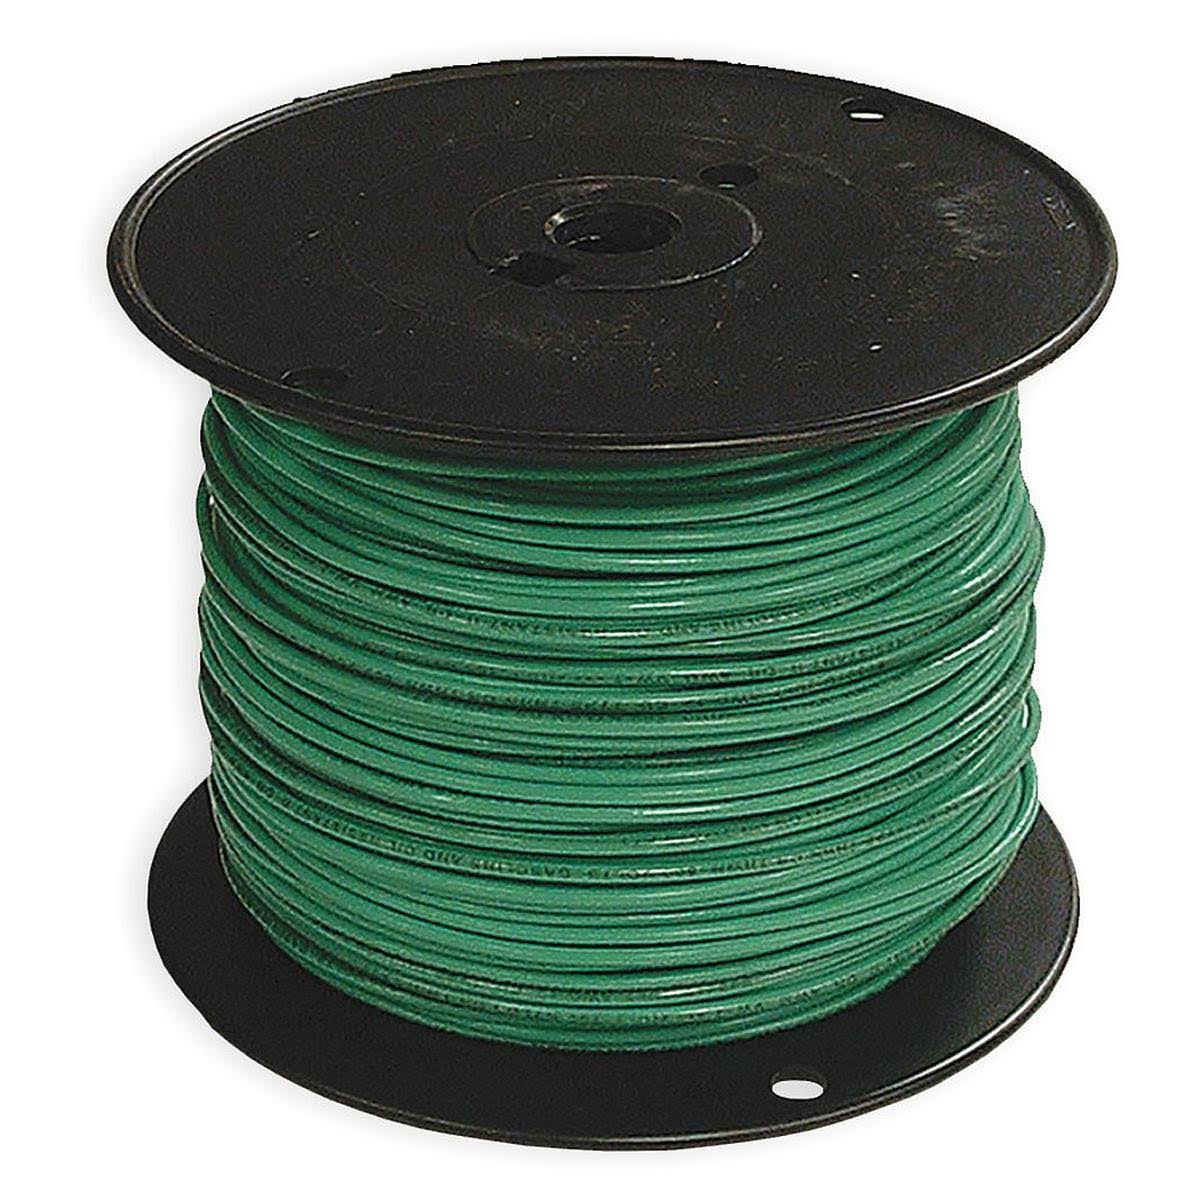 Southwire Company Solid Single Building Wire - Green, 14 awg, 500'